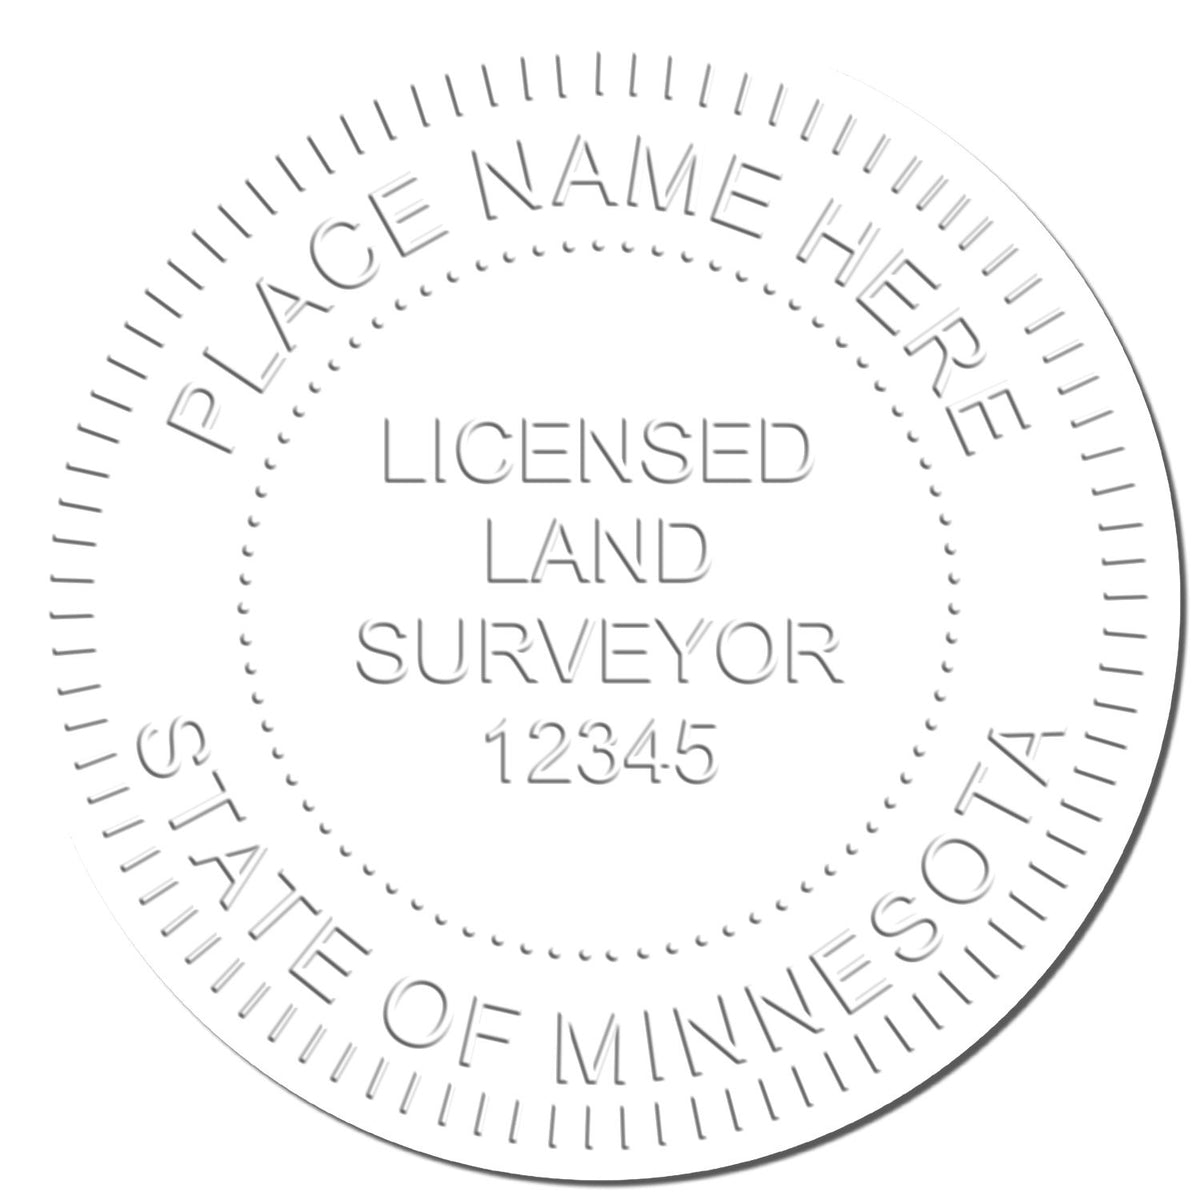 This paper is stamped with a sample imprint of the Hybrid Minnesota Land Surveyor Seal, signifying its quality and reliability.